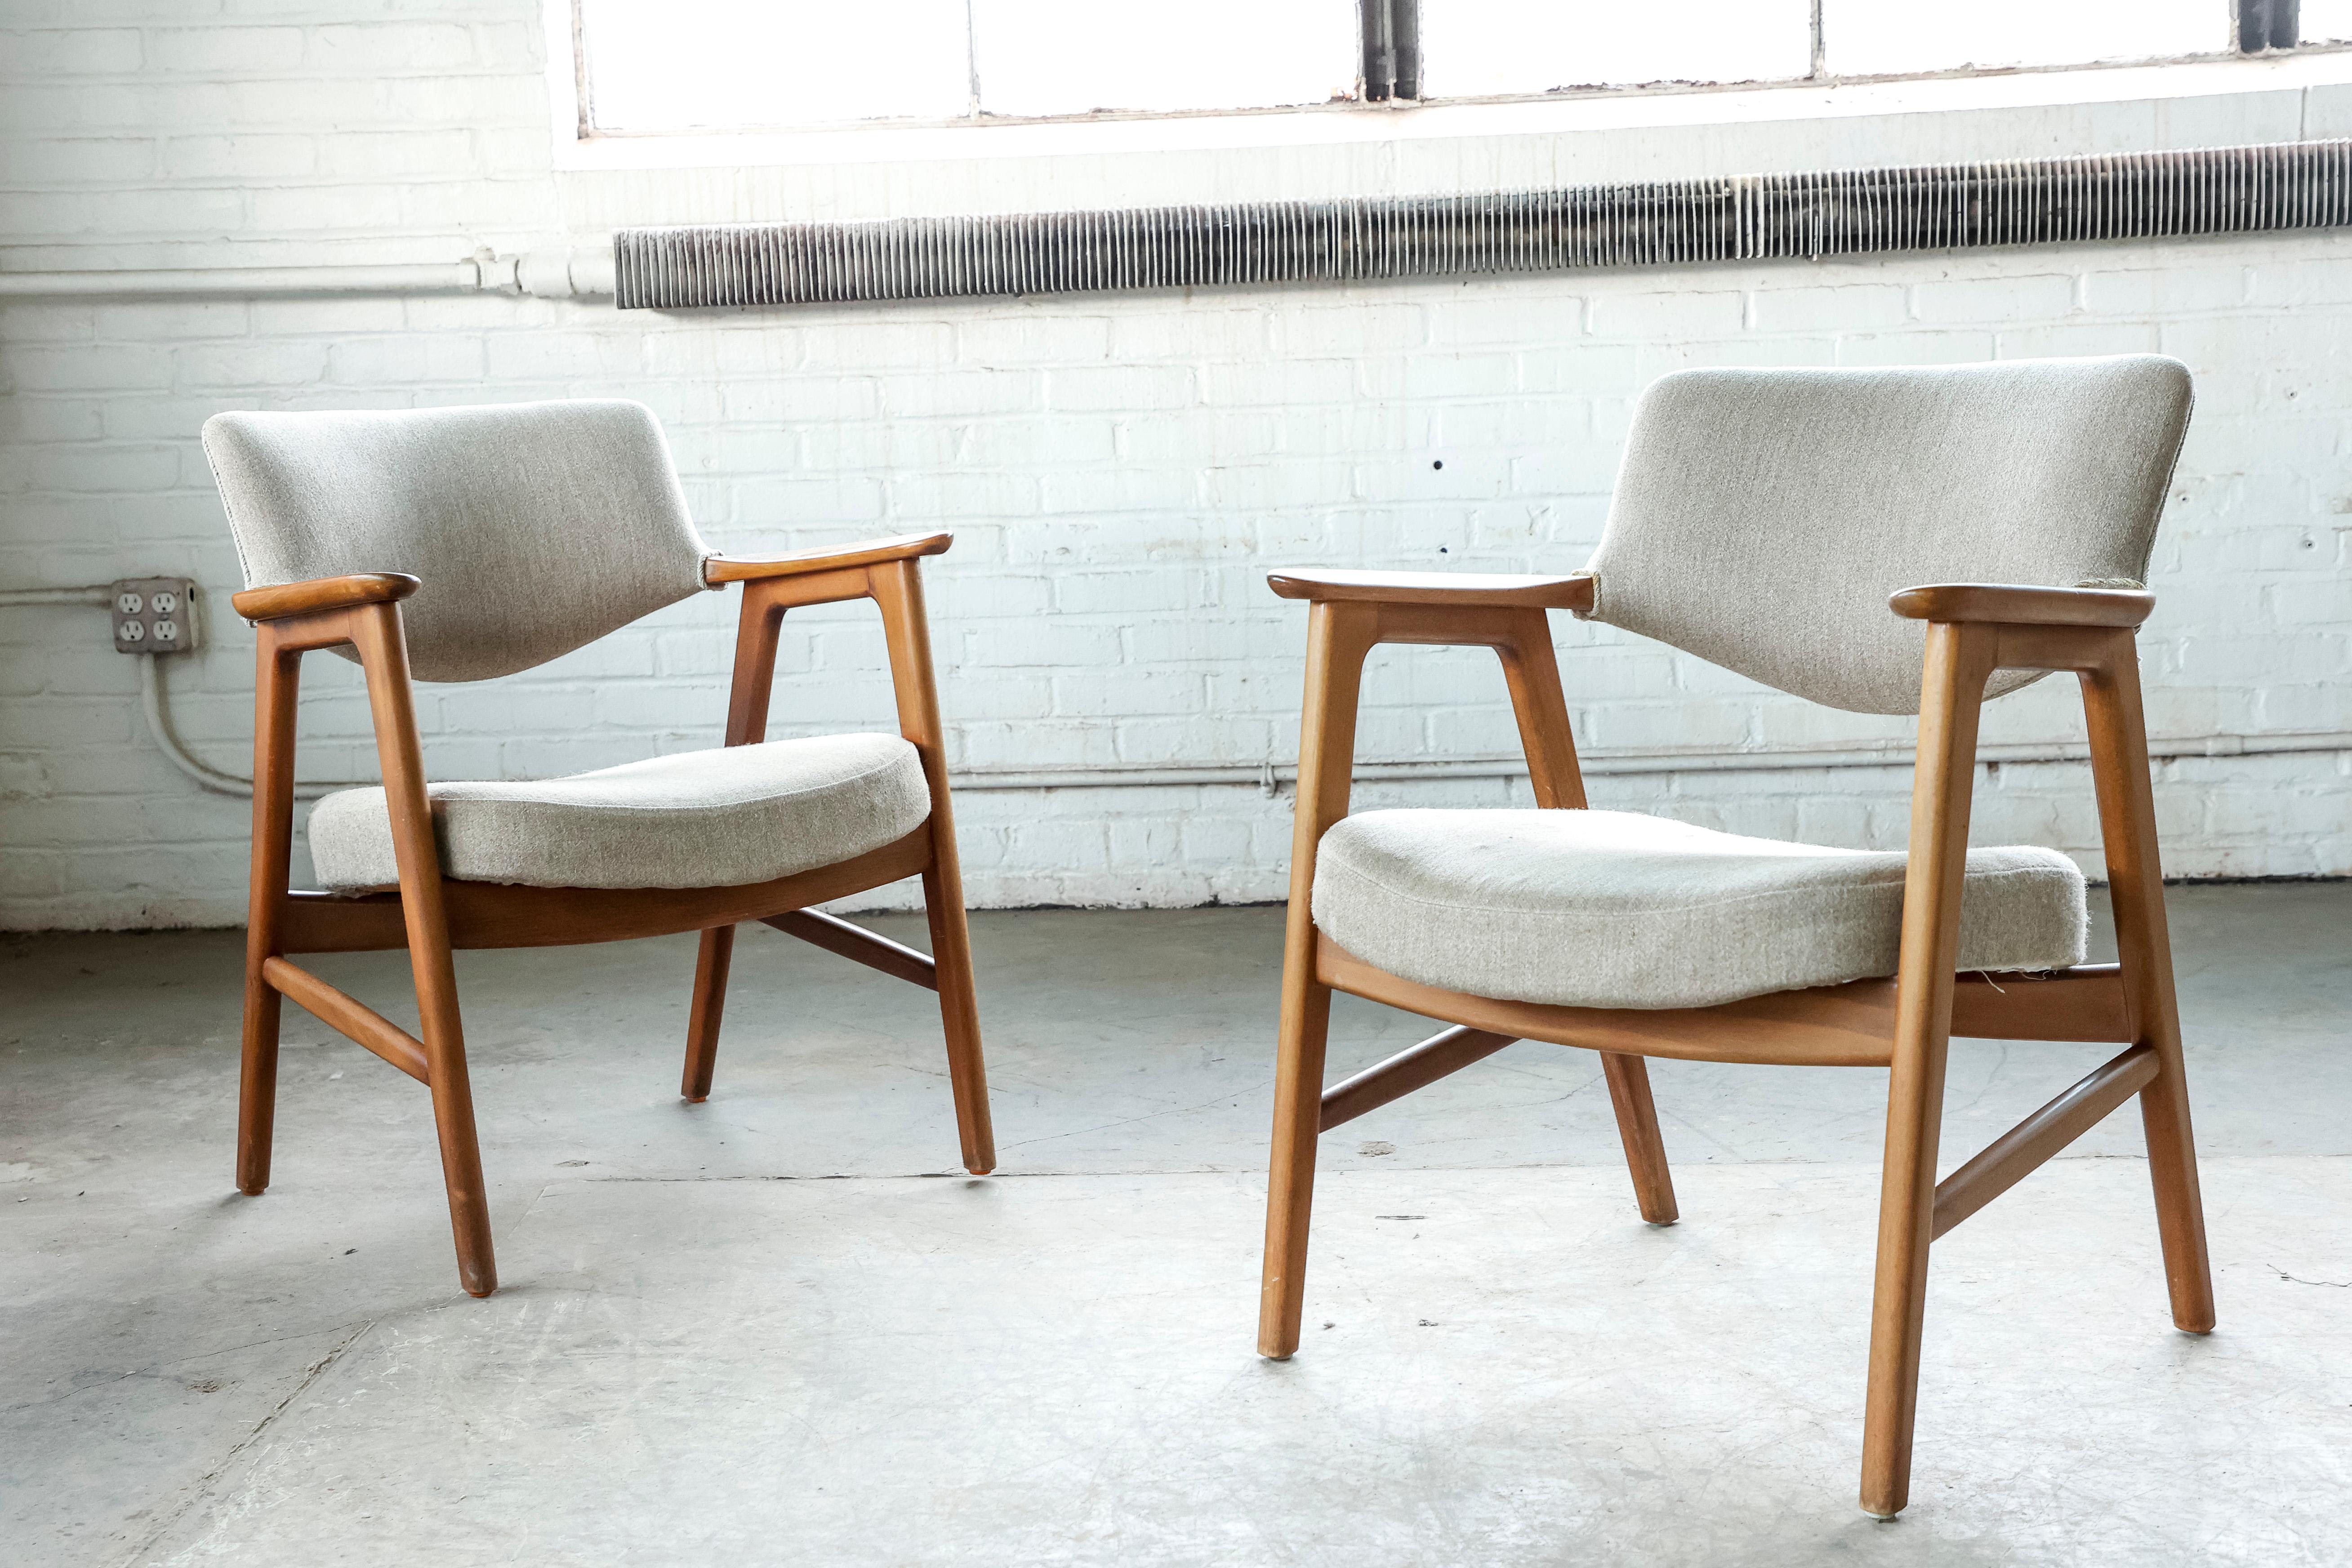 Fantastic pair set of two armchairs or desk chairs designed by Erik Kirkegaard in the 1950 for Høng Stolefabrik in Denmark. Very sought after and increasingly rare to find perfect accent chairs or desk chairs for any modern home. Made of solid